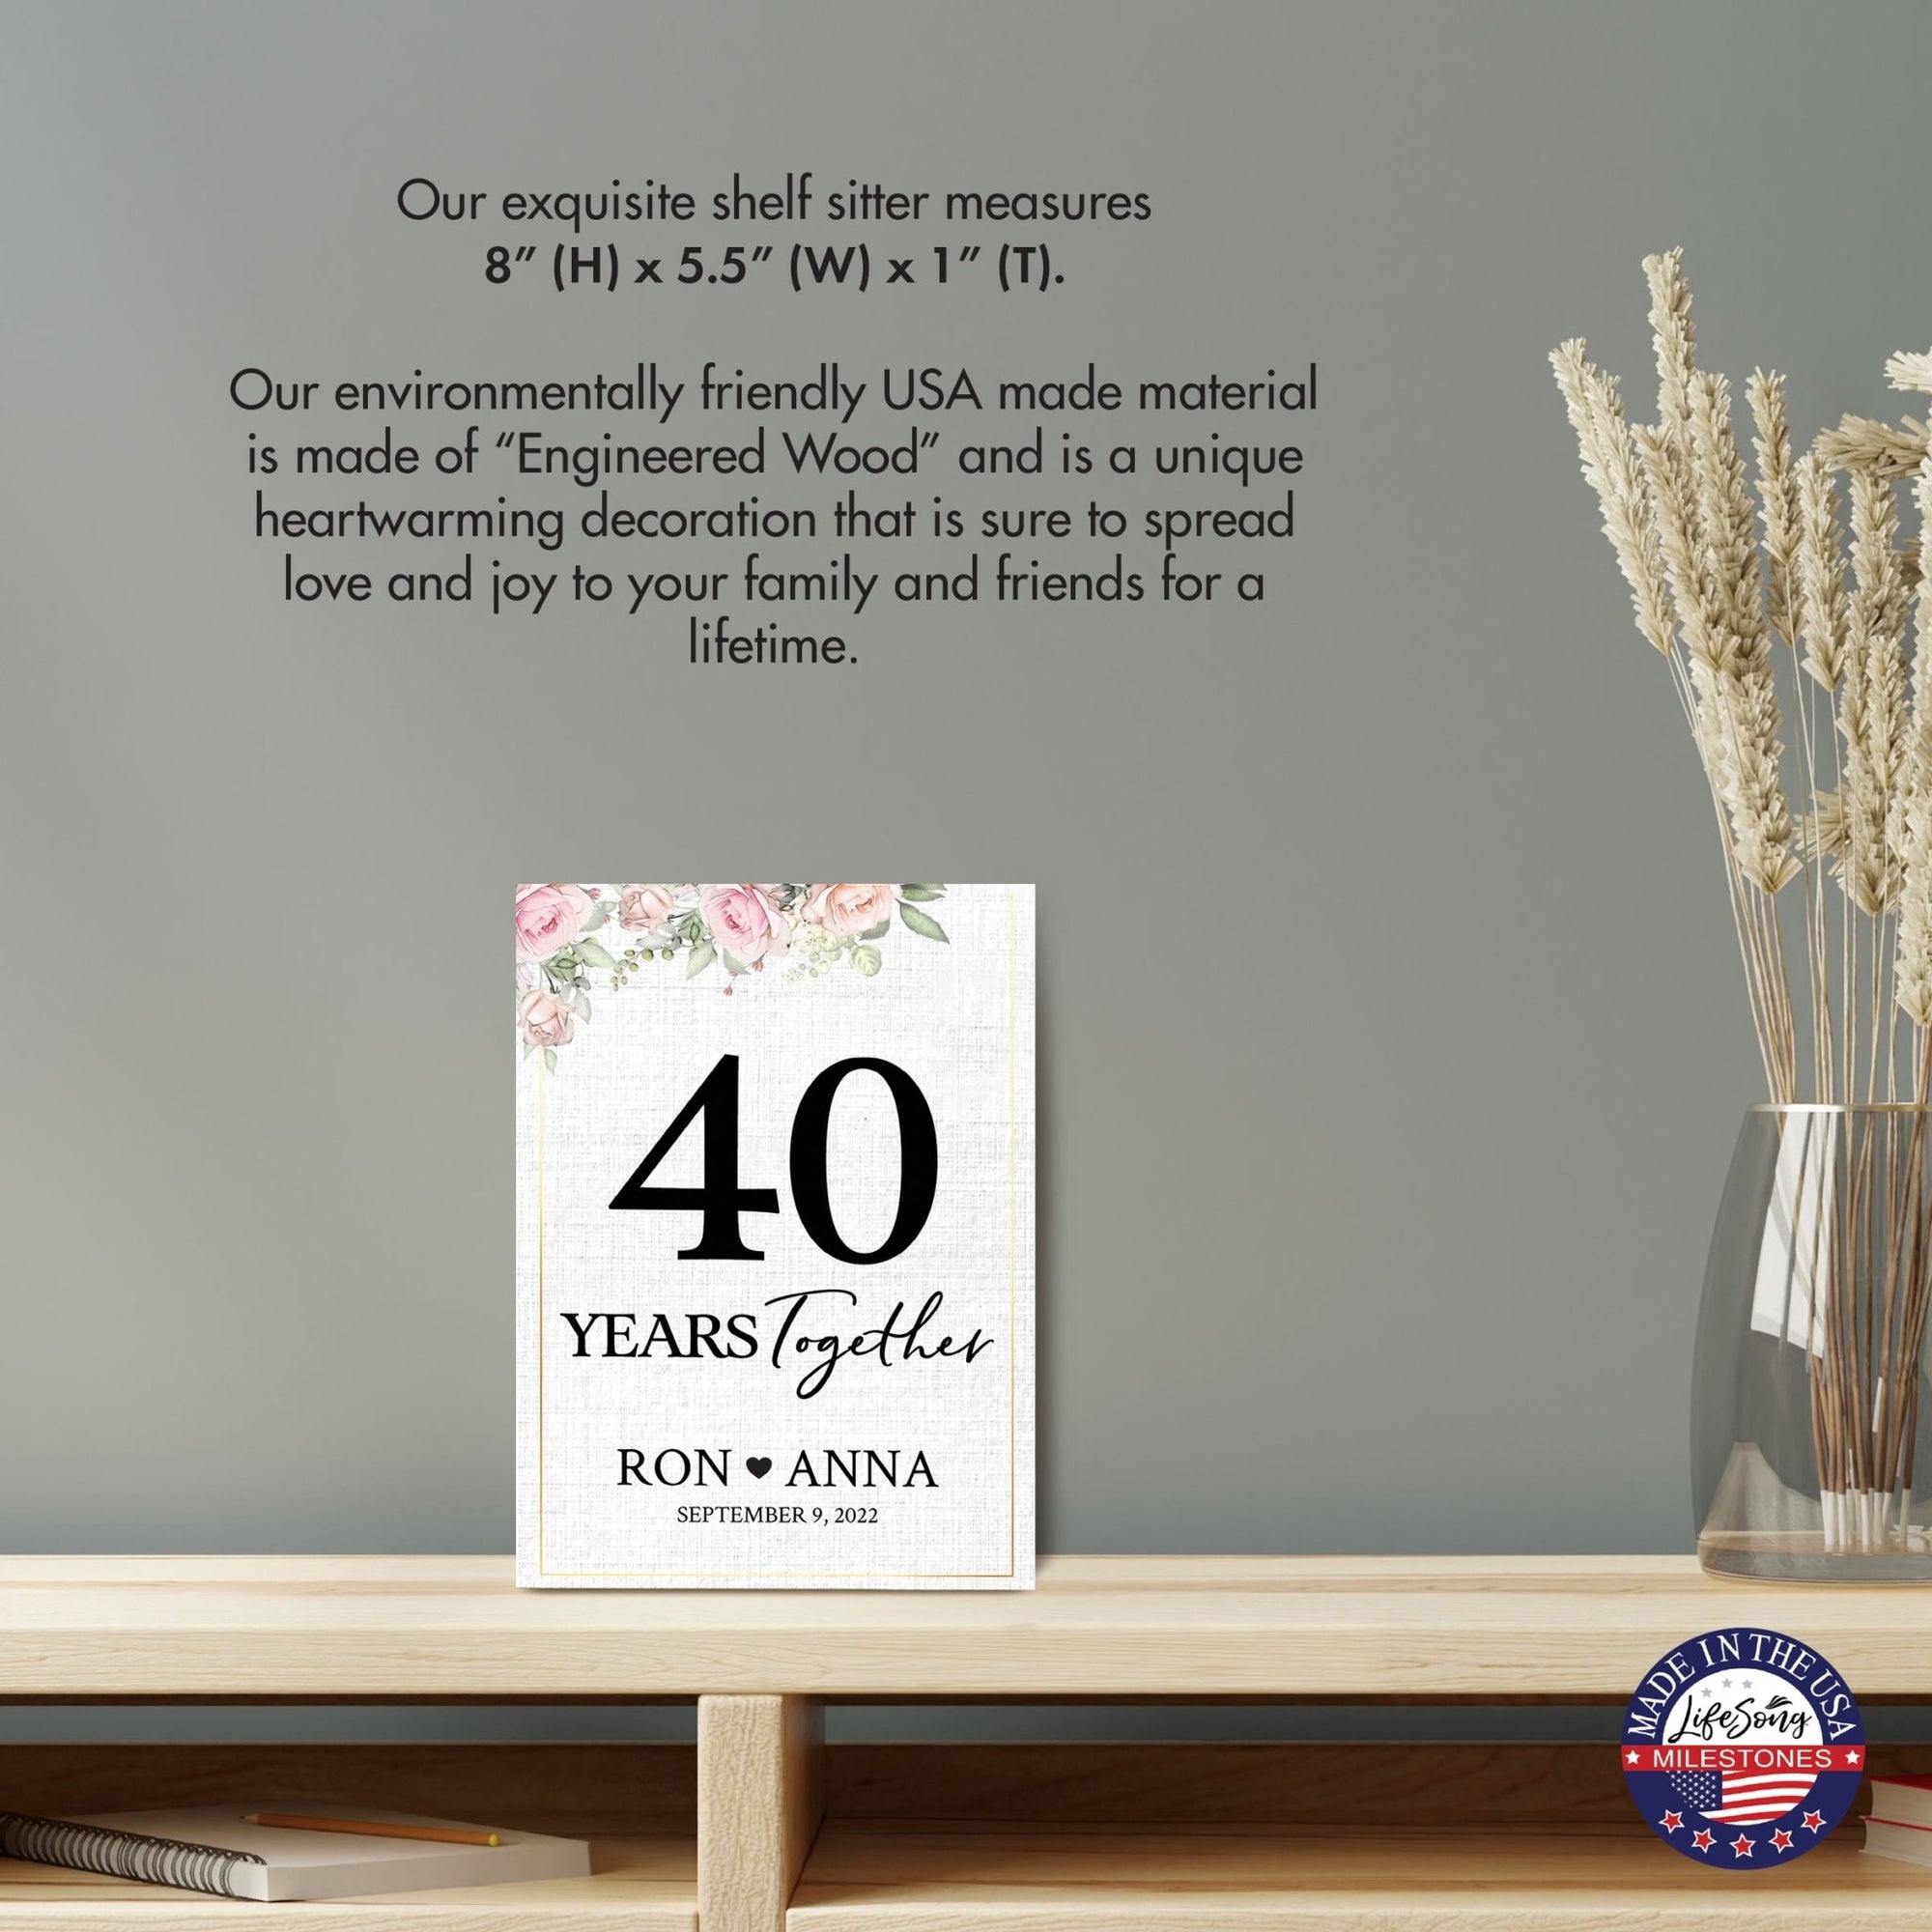 Personalized Unique Shelf Décor and Tabletop Signs Gifts for 40th Wedding Anniversary - LifeSong Milestones